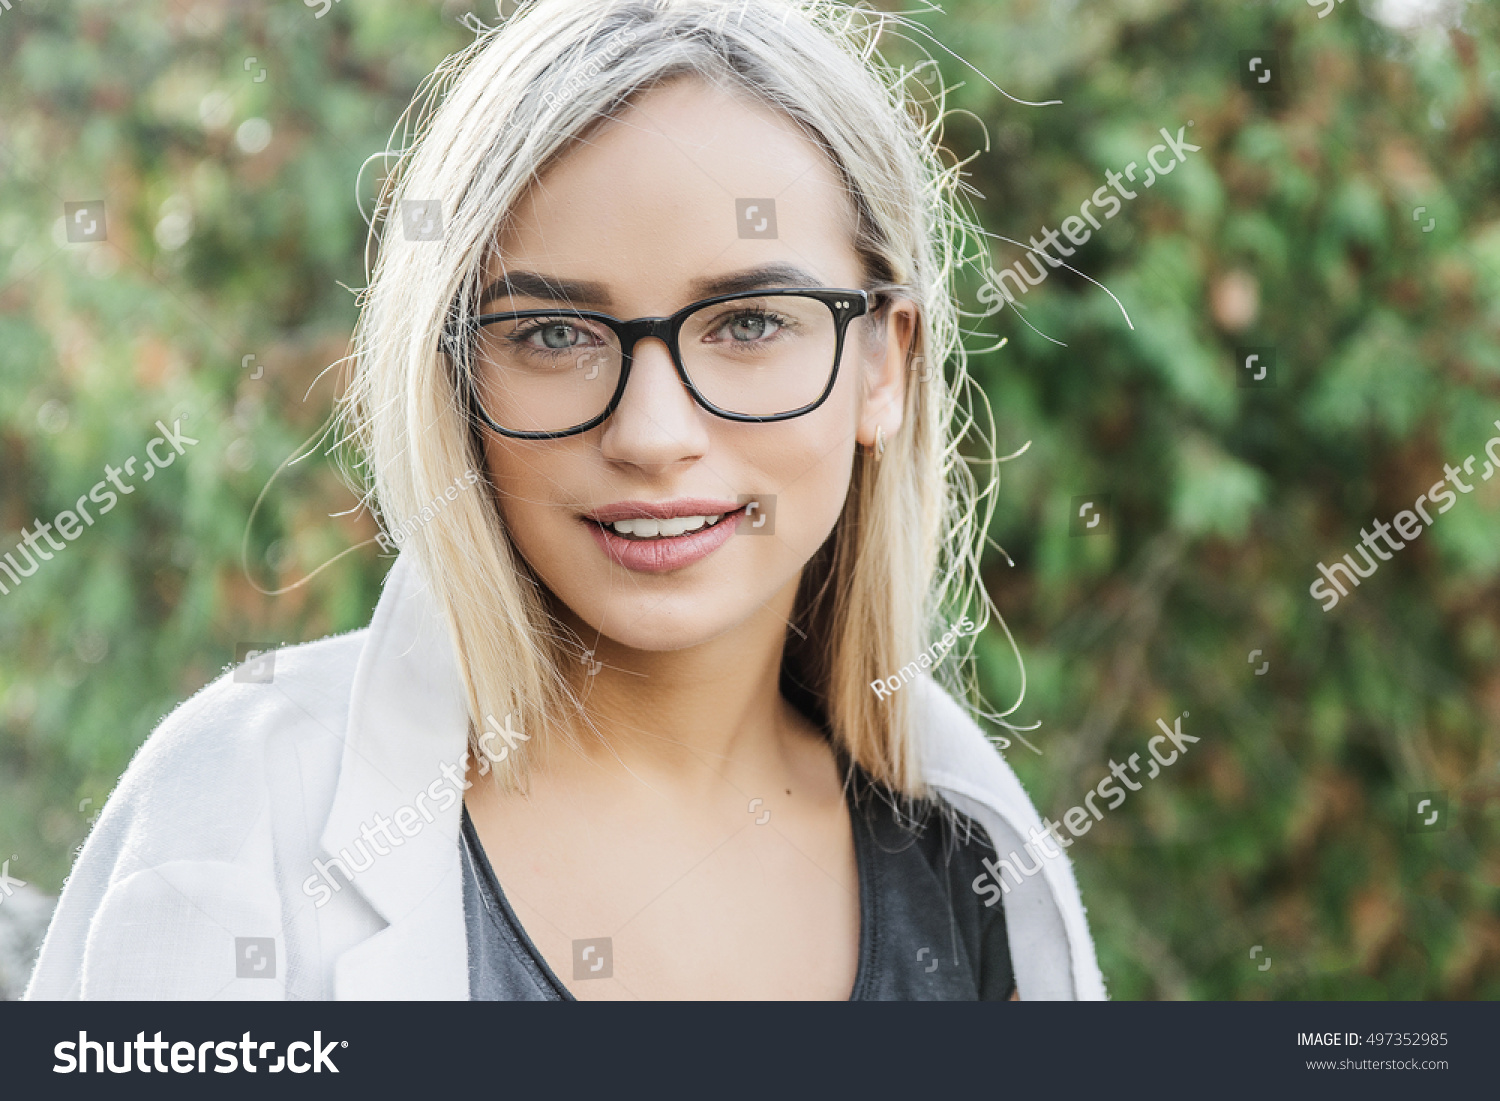 portrait of a young woman, blonde, glasses, outdoors in the park #497352985